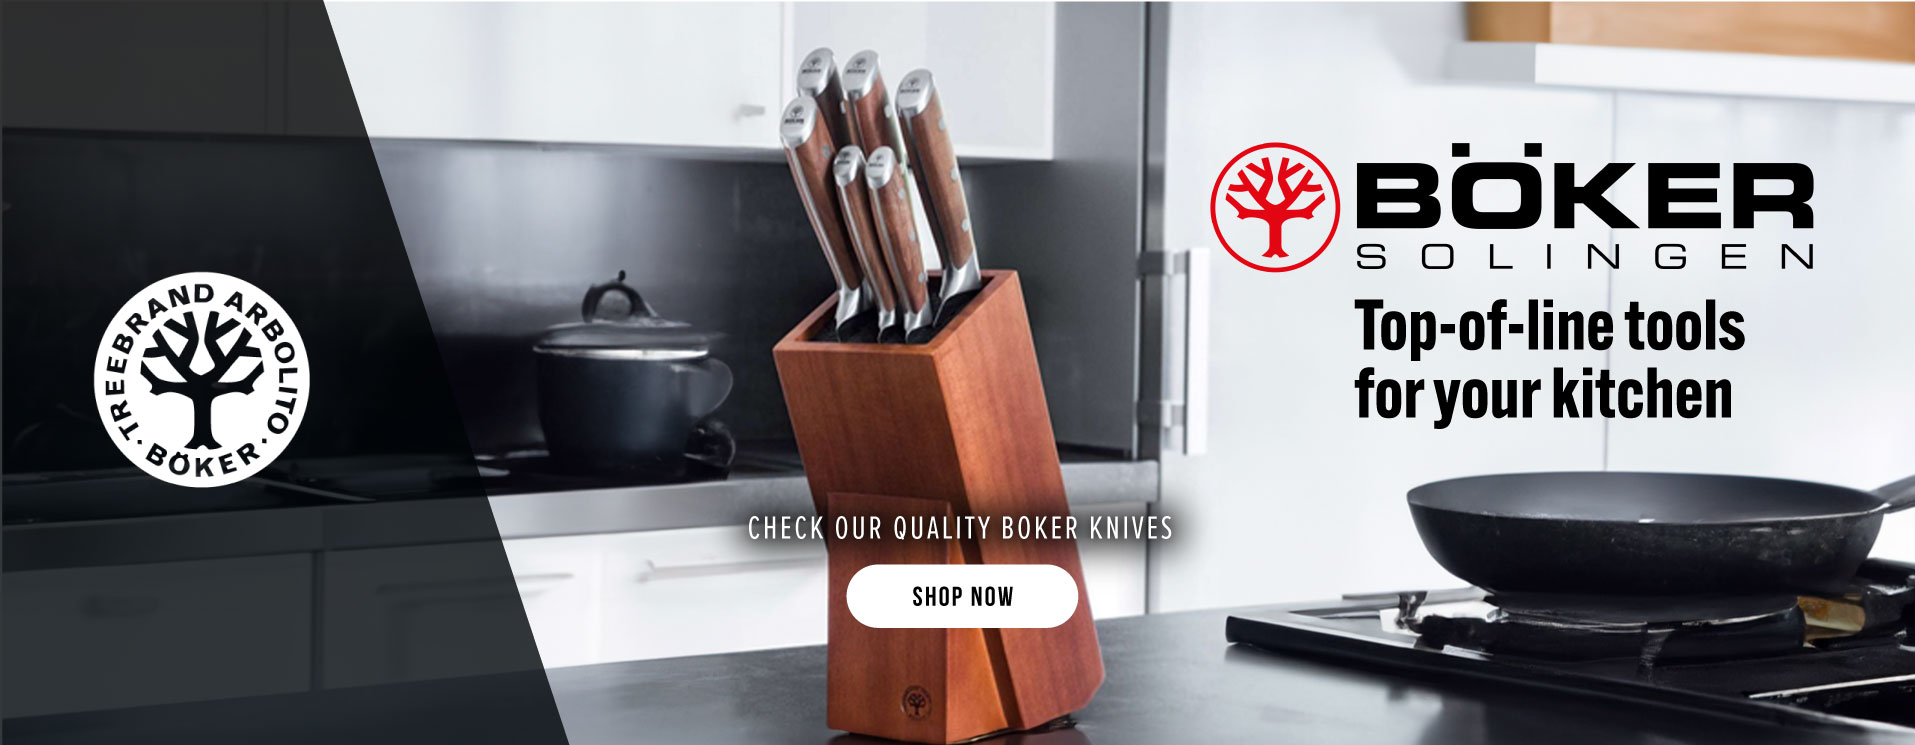 Top-of-line tools for your kitchen